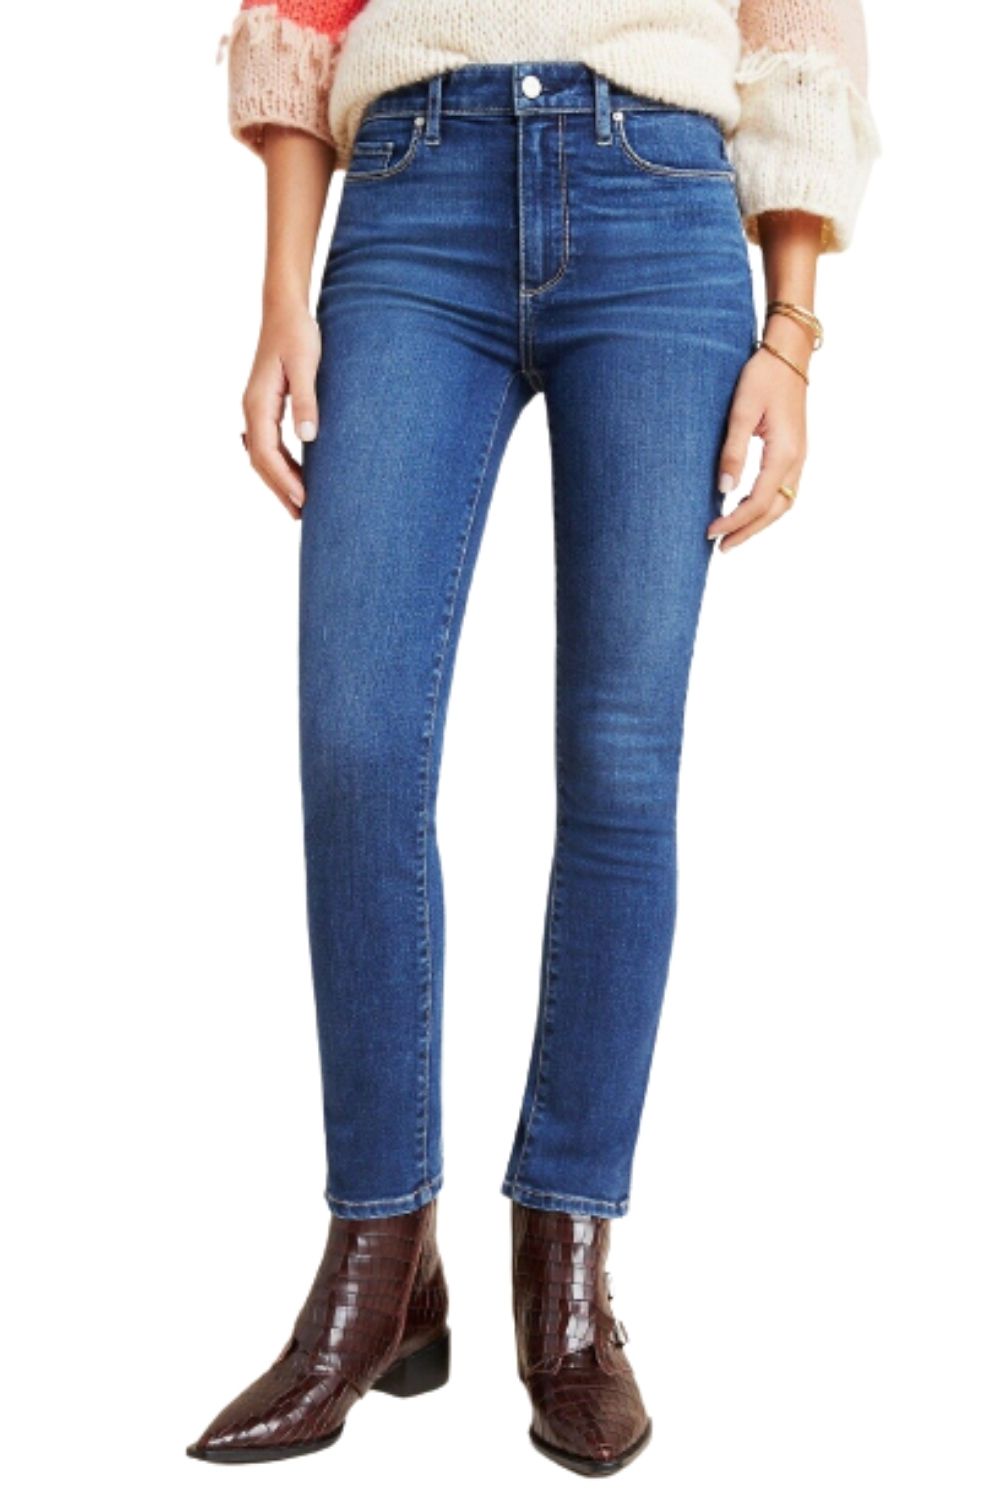 Paige Hoxton High-Rise Skinny Ankle Crop Women’s Jeans